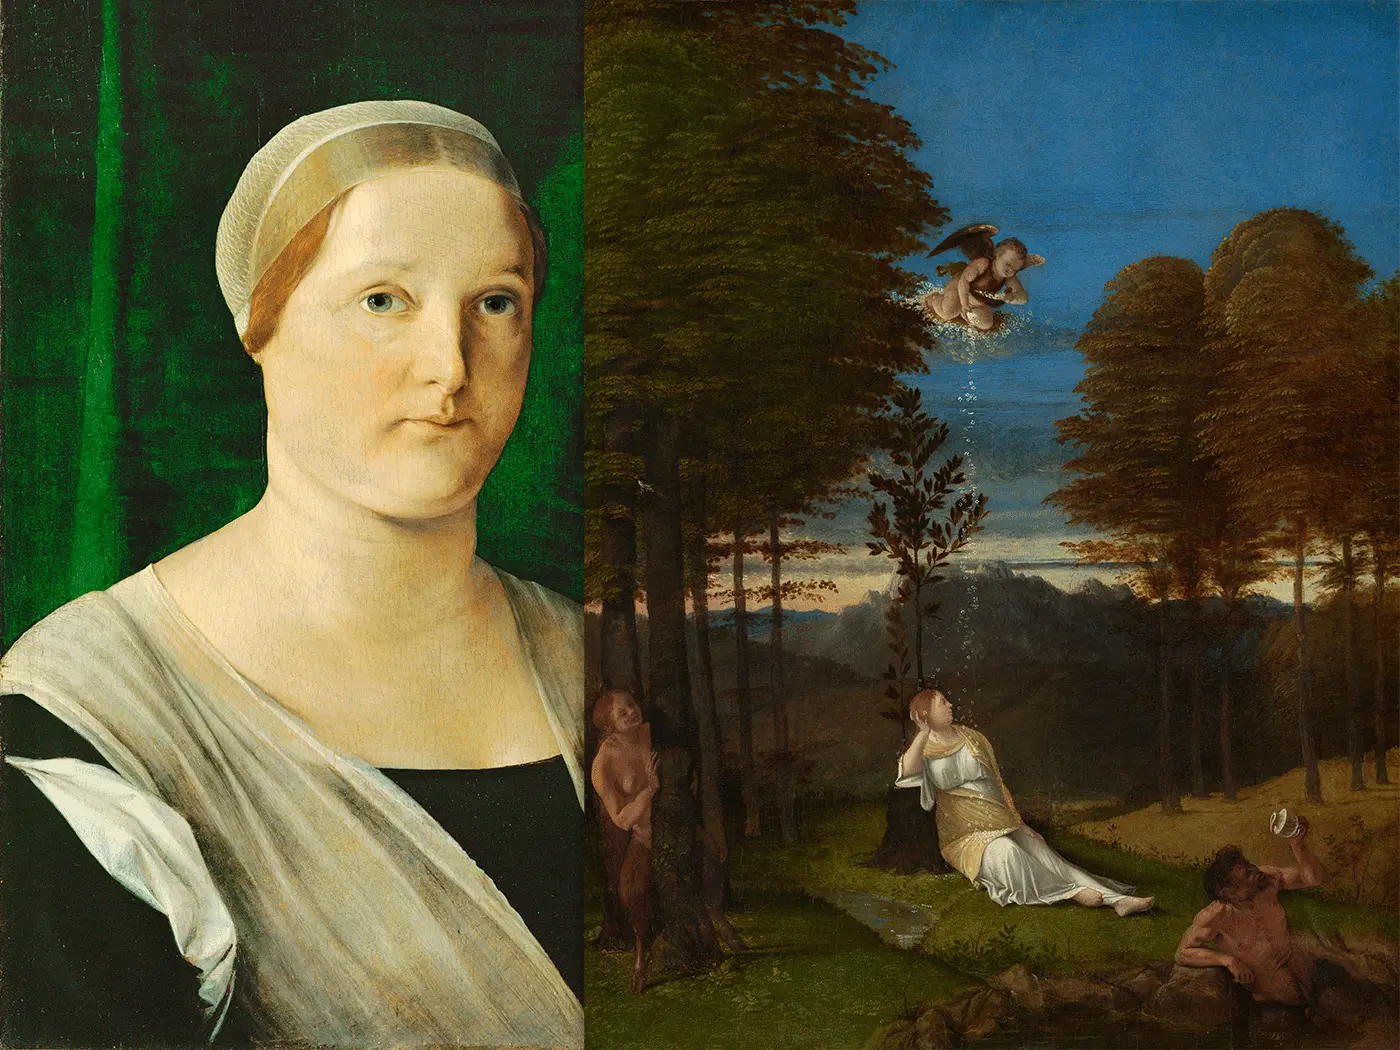 Reconstruction illustrating sliding cover as it opens, featuring Lorenzo Lotto's Portrait of Giovanna de' Rossi (left) and Portrait Cover With an Allegory of Chastity (right), both circa 1505